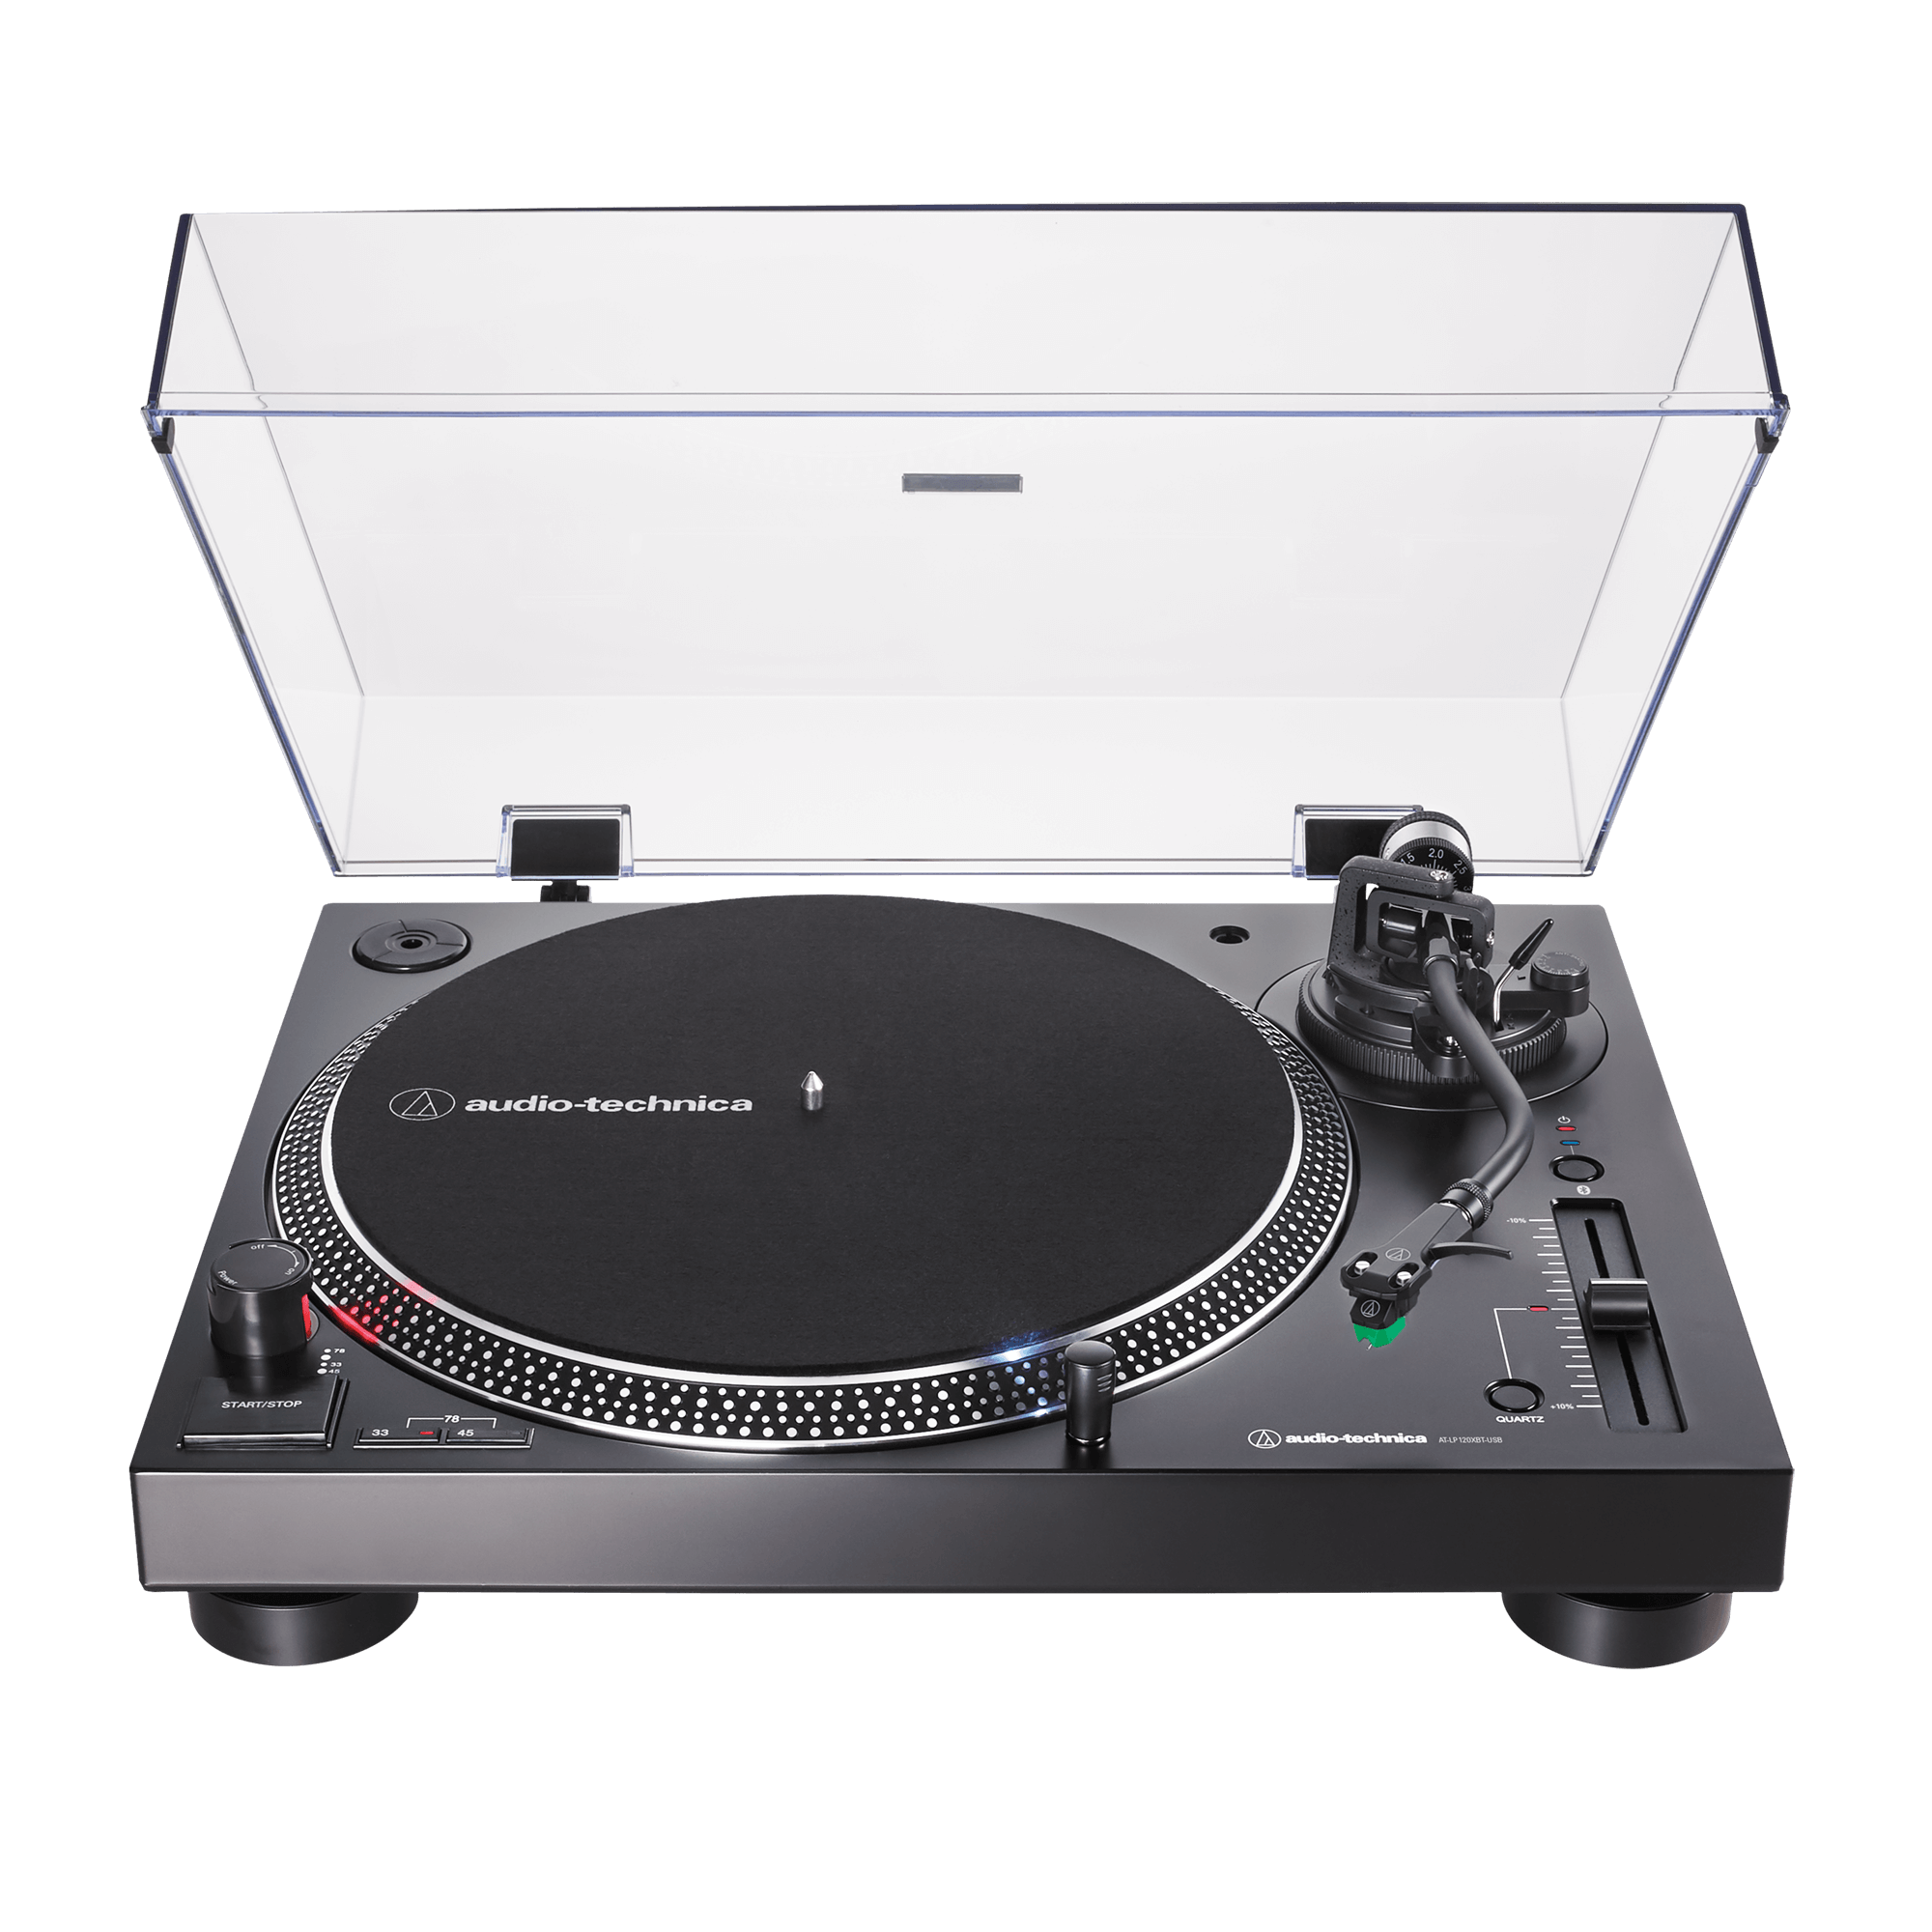 AT-LP120XBT-USB　Direct　Audio-Technica　Drive　Turntable